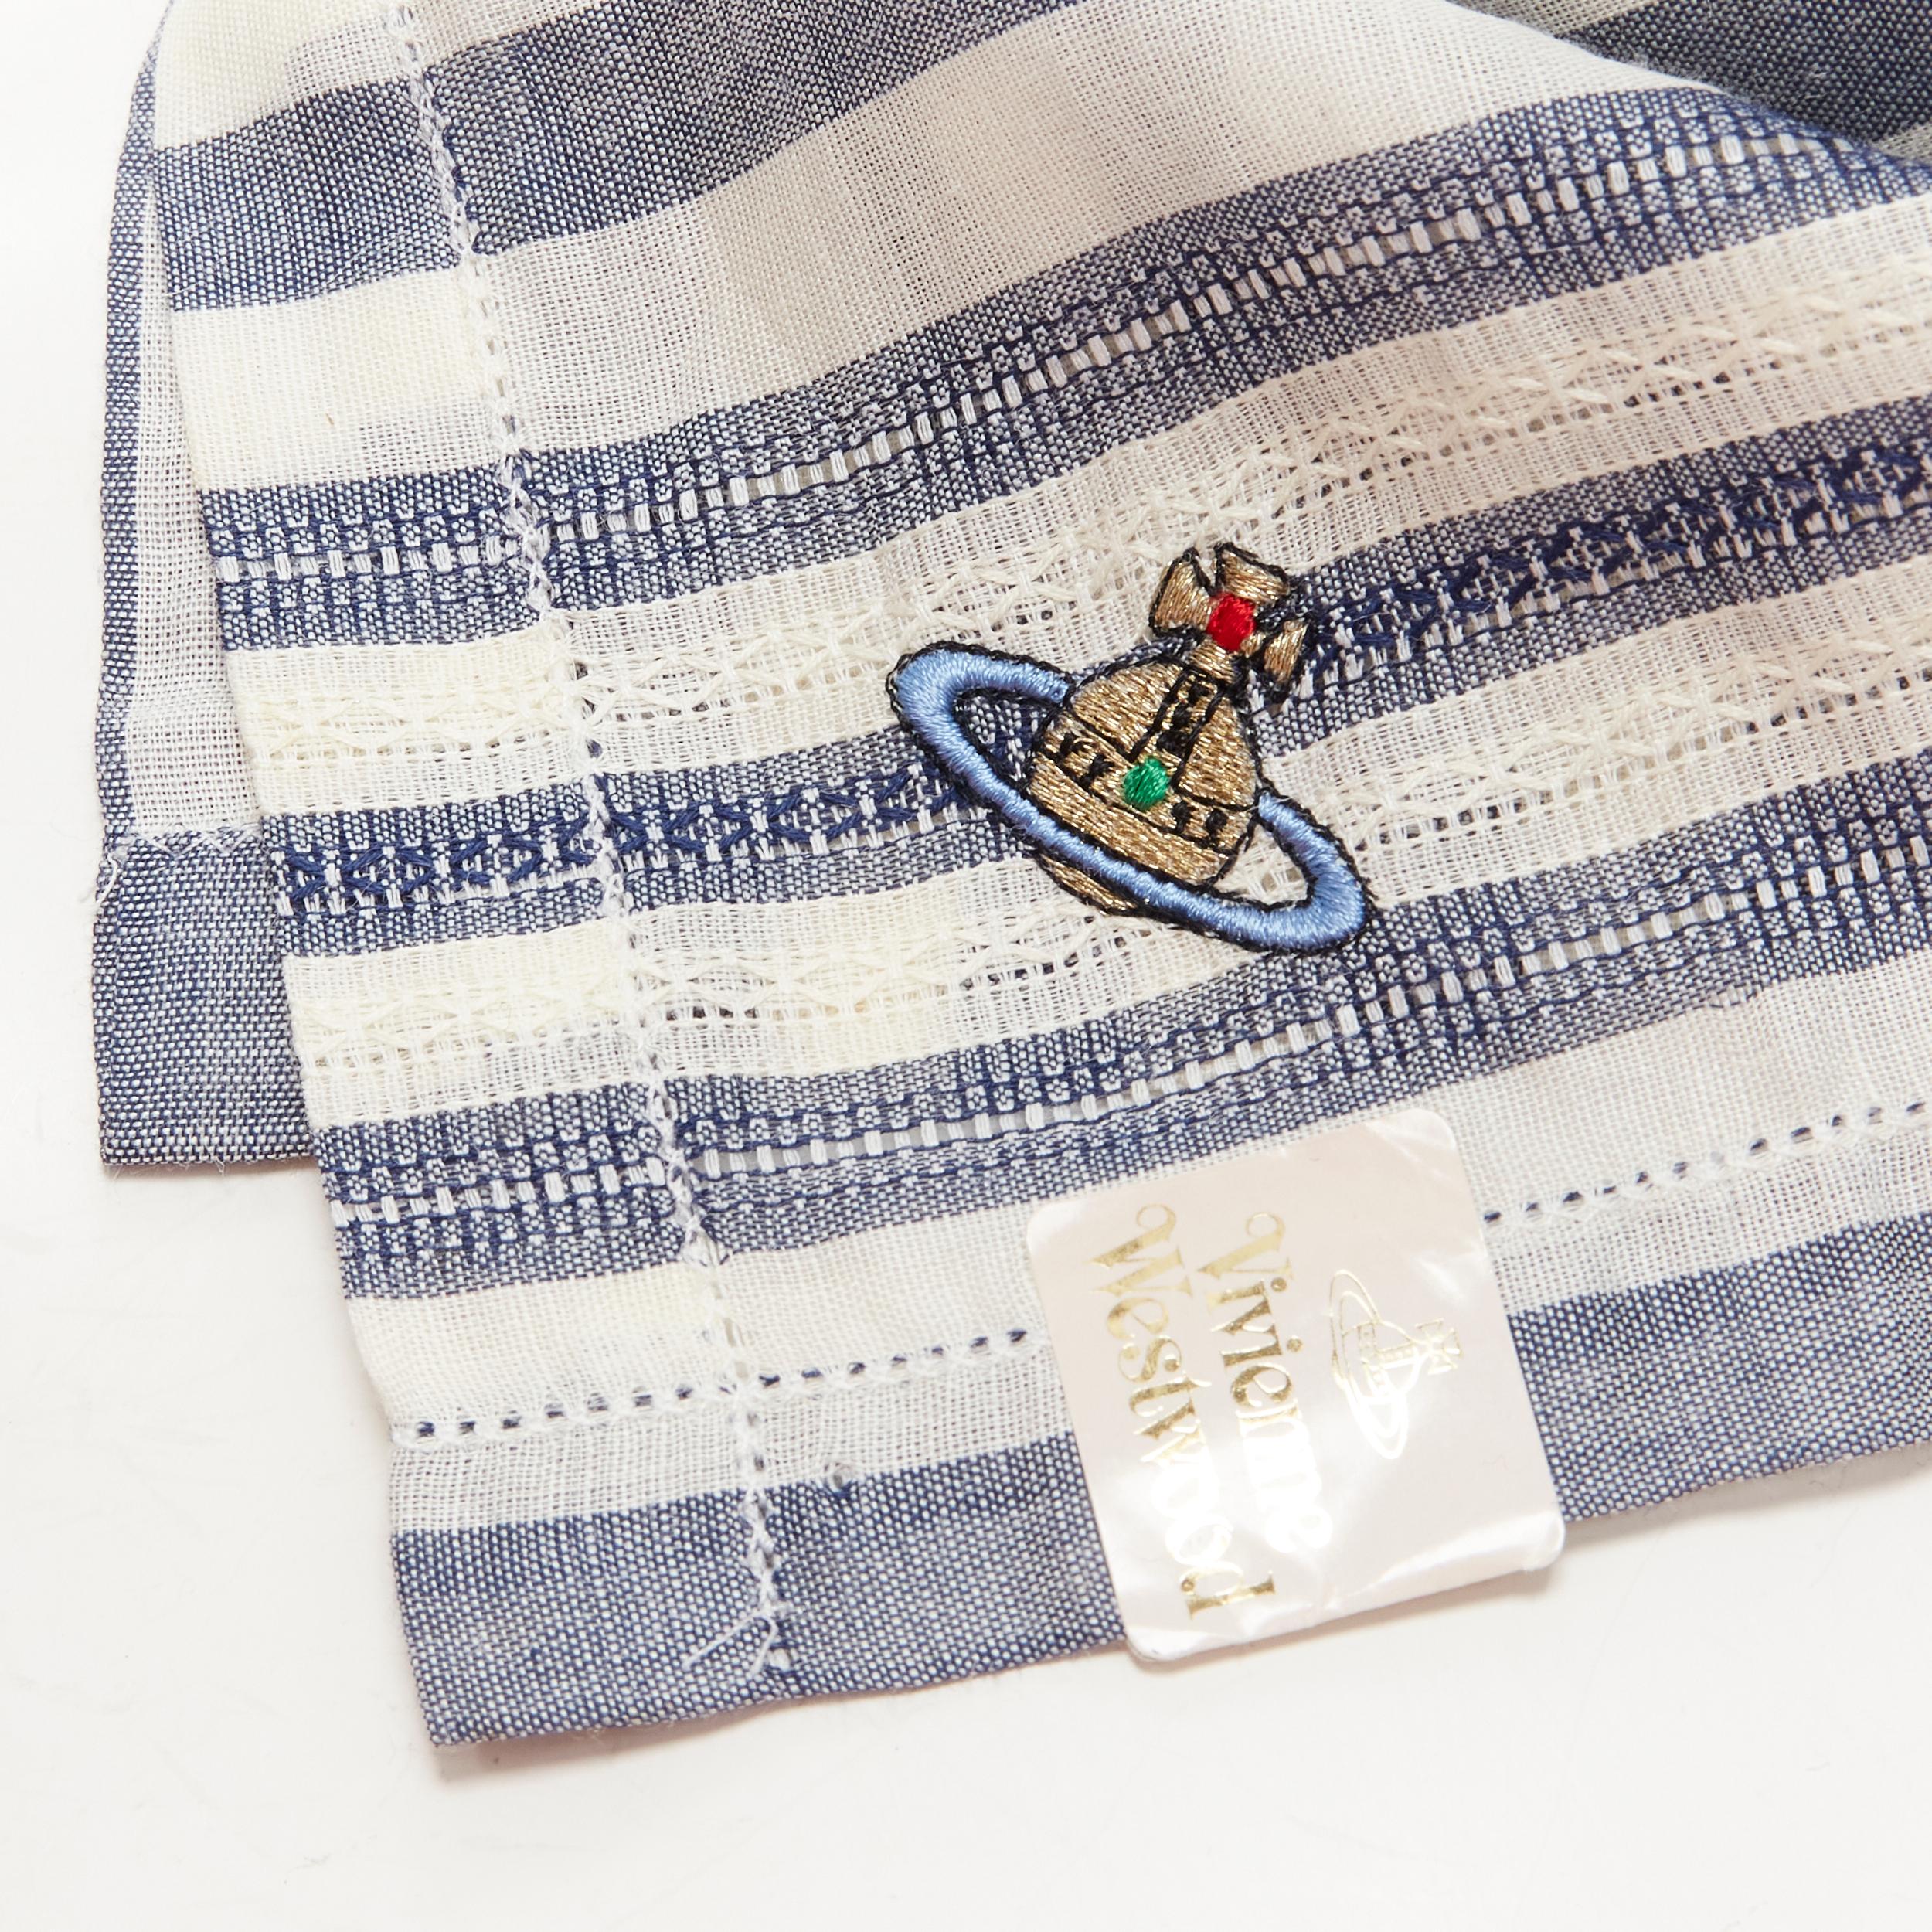 VIVIENNE WESTWOOD blue white nautical stripe orb logo handkerchief neckscarf 
Reference: CRTI/A00729 
Brand: Vivienne Westwood 
Material: Cotton 
Color: Blue 
Pattern: Striped 
Extra Detail: Orb logo embroidery 
Made in: Japan 

CONDITION: